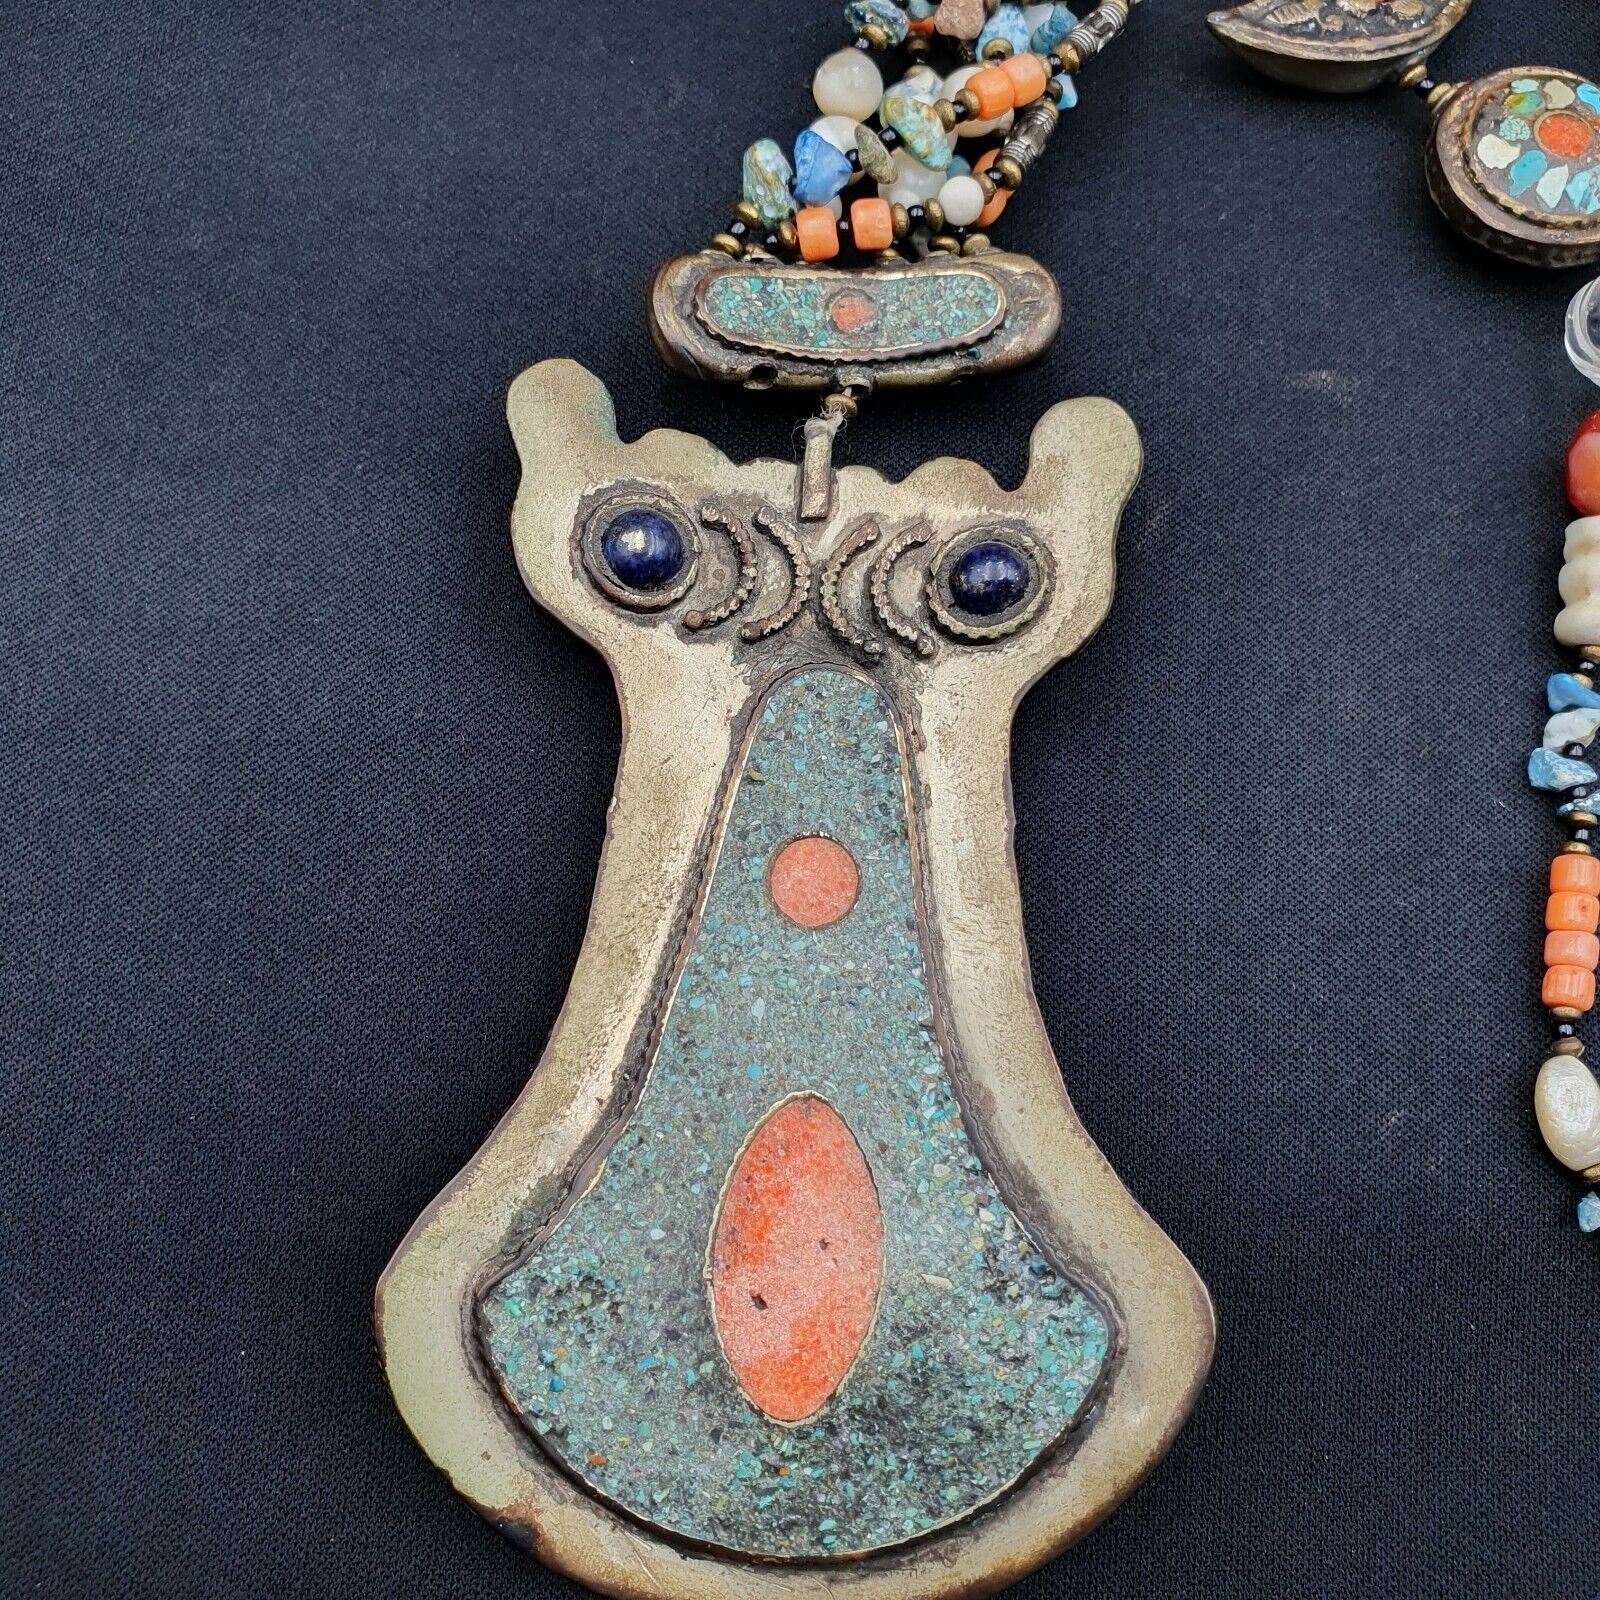 Tibetan Nepalese Necklace Handcrafted Turquoise coral Vintage Jewelry Necklace